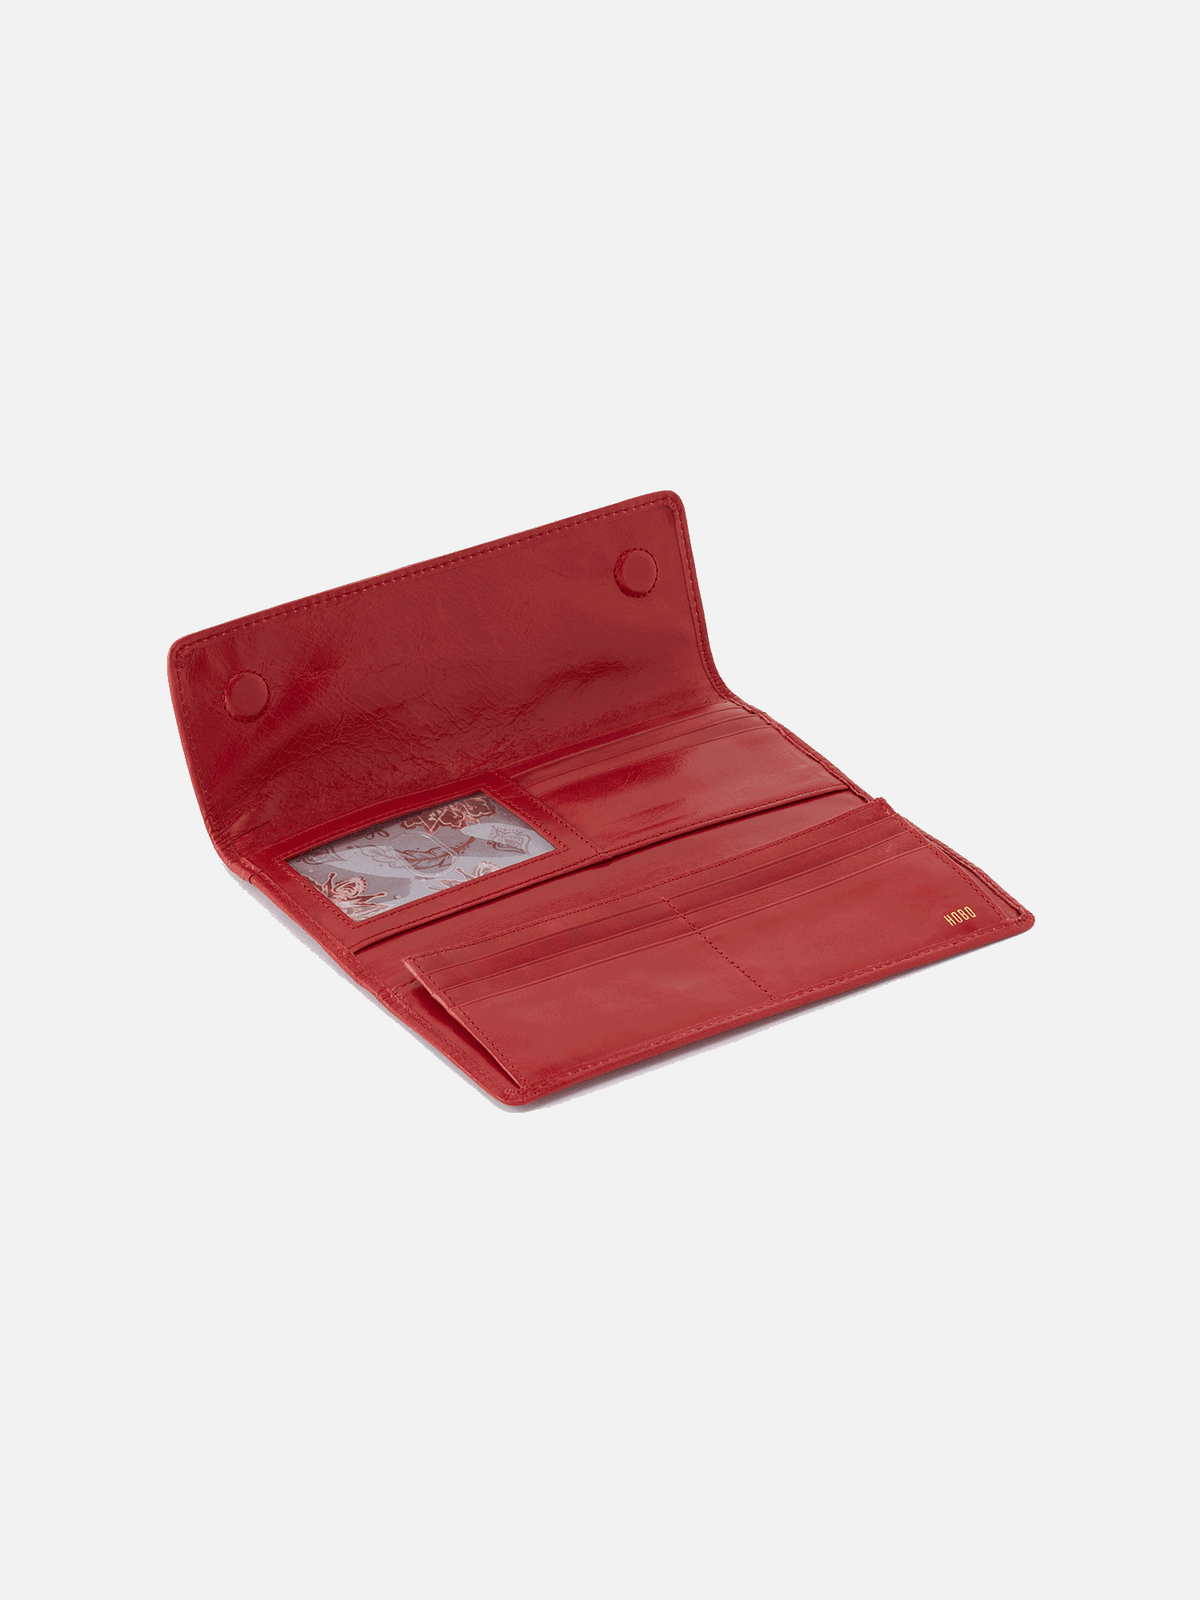 hobo ardor continental trifold wallet in brick red polished leather